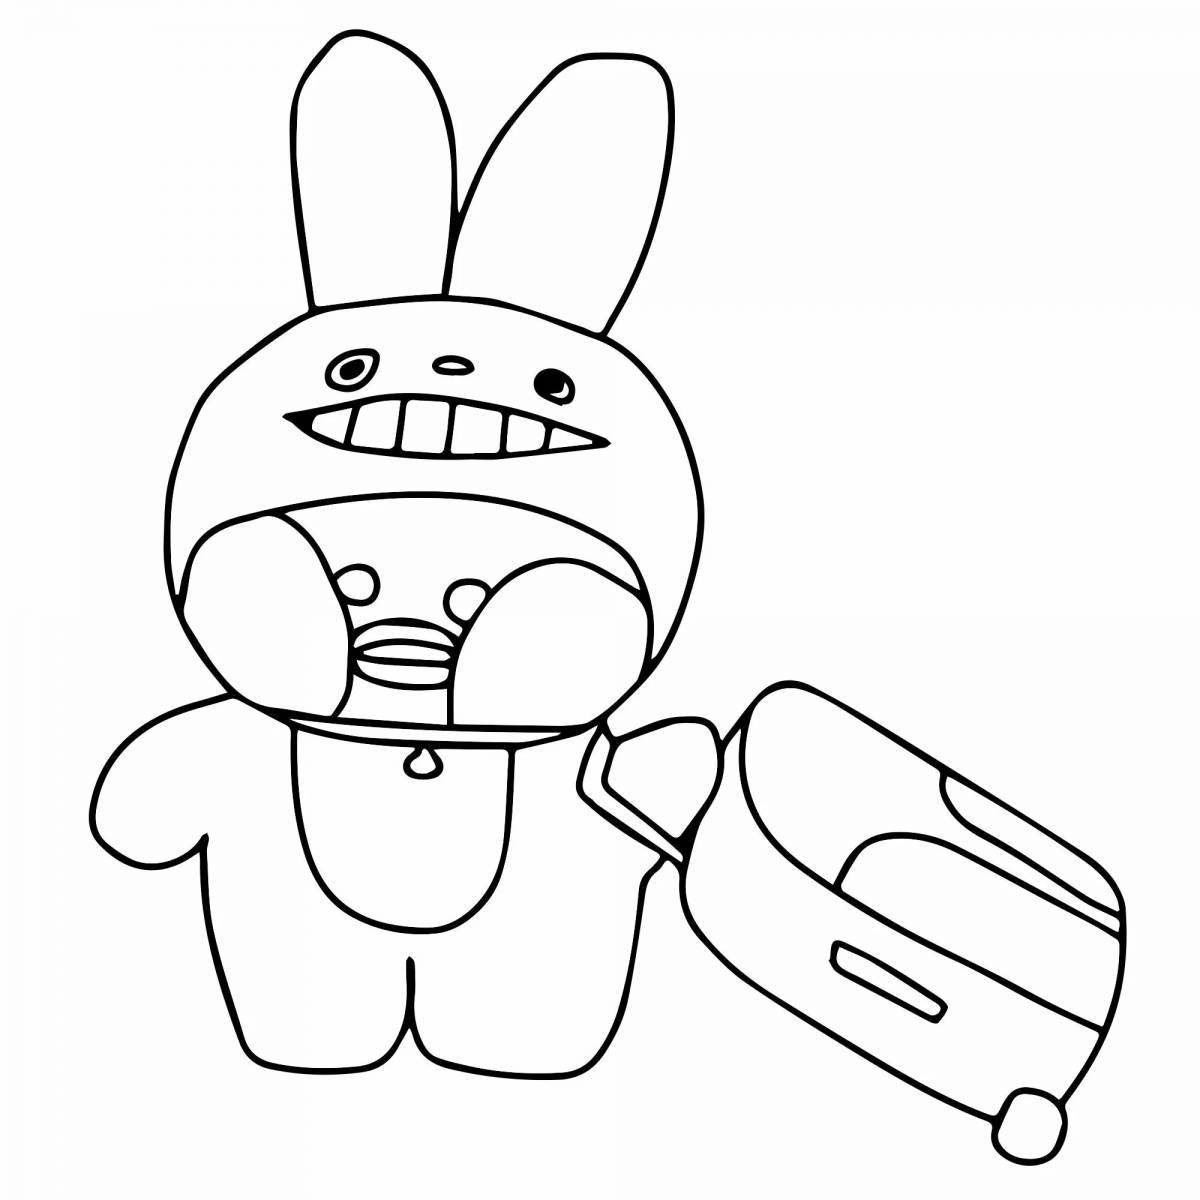 Bright lalanfant duck coloring page